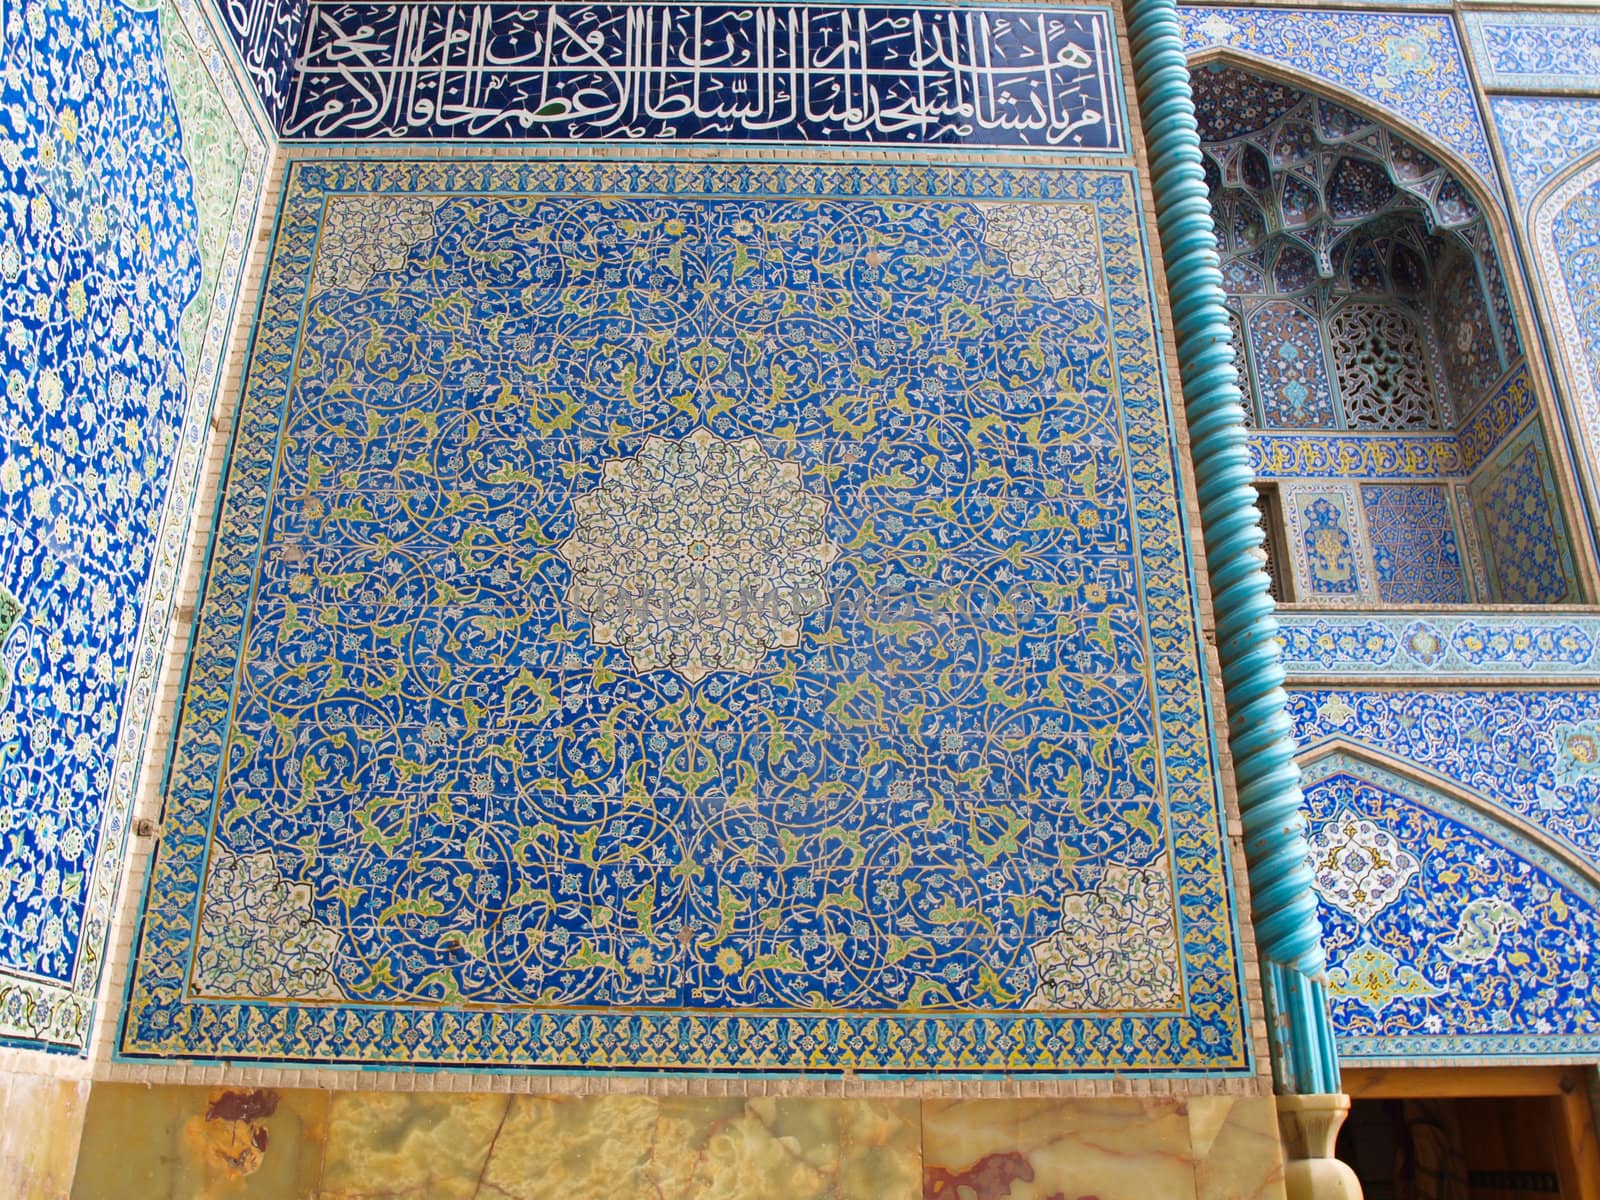 the mosque wall, oriental ornaments from Sheikh Loft Allah Mosque in Isfahan, Iran